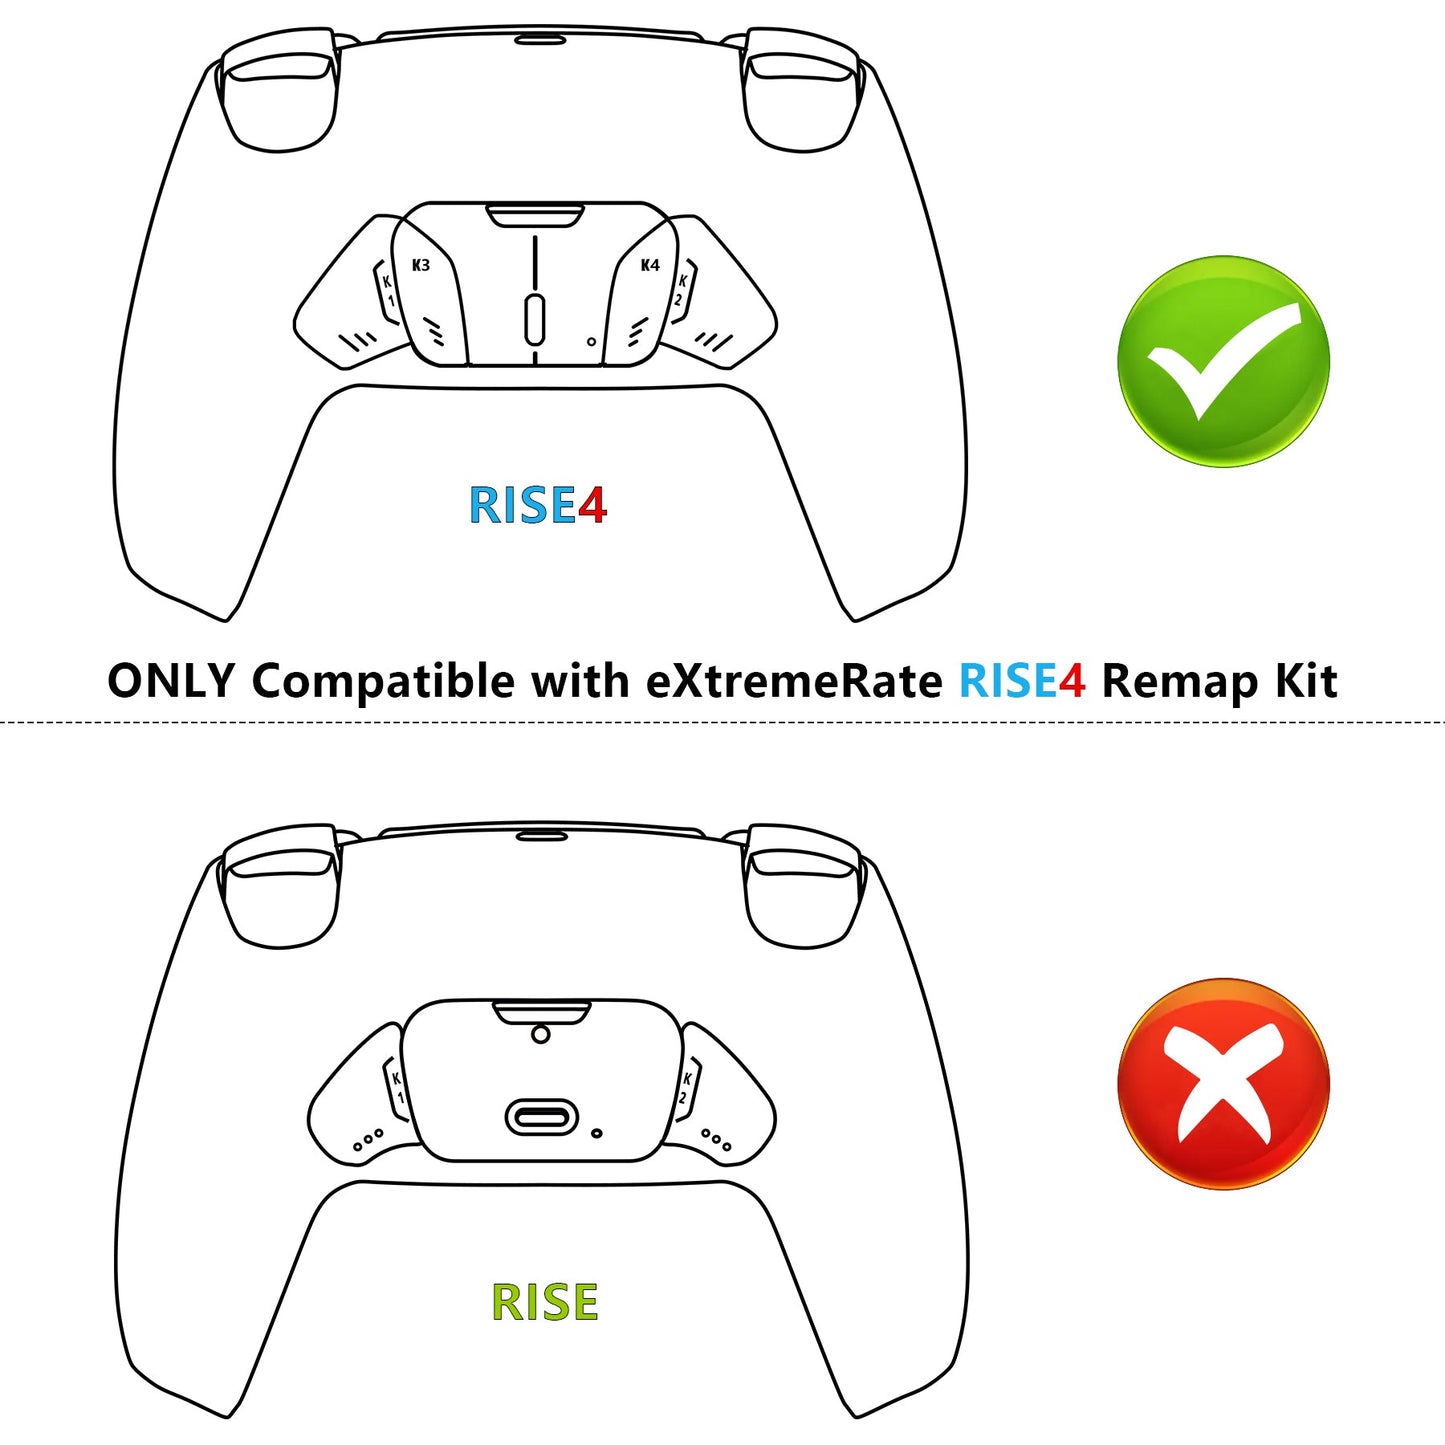 eXtremeRate Retail Solid Black Replacement Redesigned K1 K2 K3 K4 Back Buttons Housing Shell for ps5 Controller eXtremeRate RISE4 Remap Kit - Controller & RISE4 Remap Board NOT Included - VPFM5001